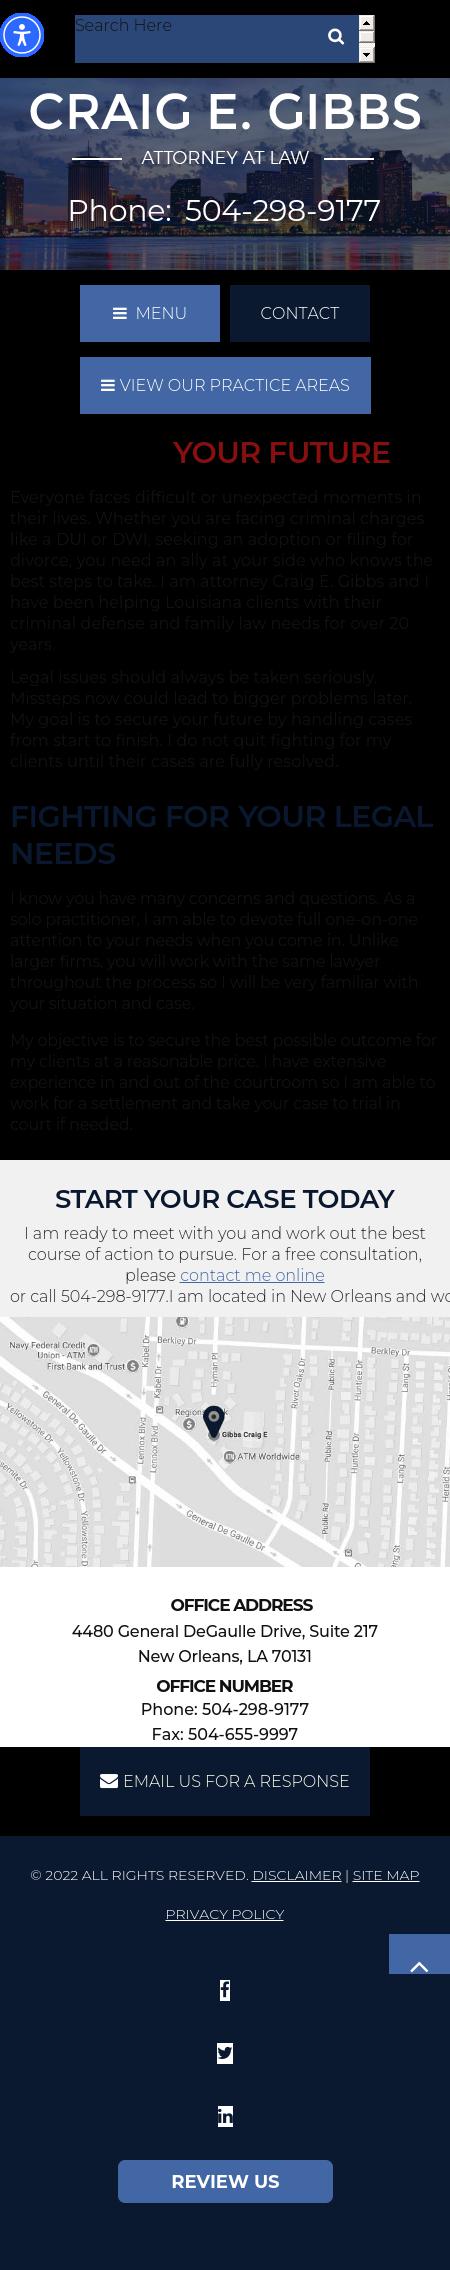 Craig E. Gibbs, Attorney at Law - New Orleans LA Lawyers